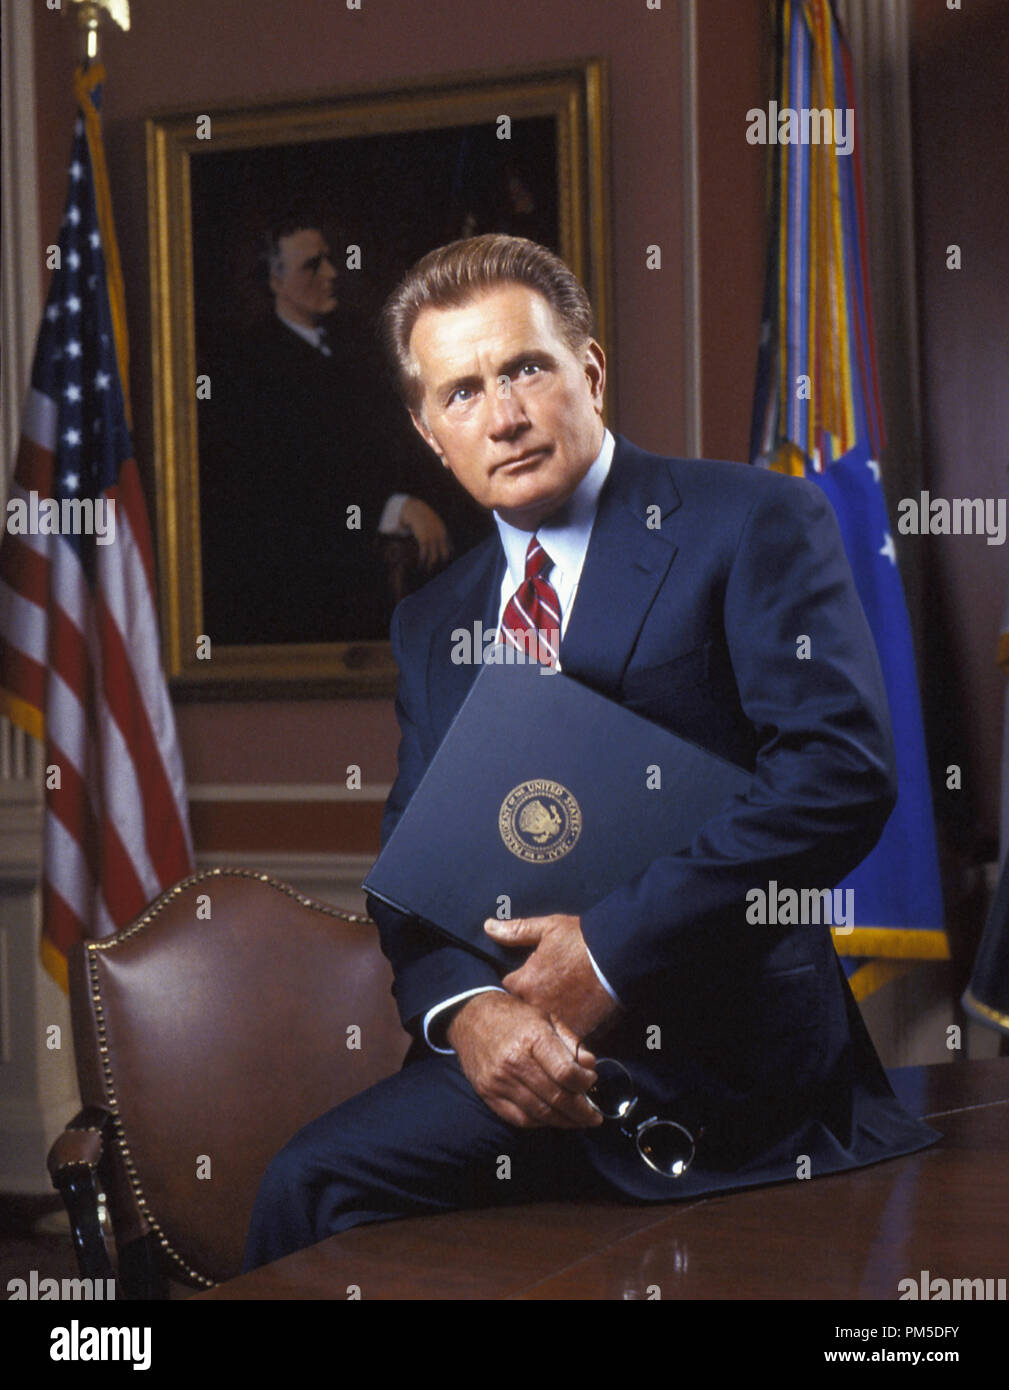 Film Still / Publicity Still from 'The West Wing' Martin Sheen 2005  File Reference # 30736394THA  For Editorial Use Only -  All Rights Reserved Stock Photo